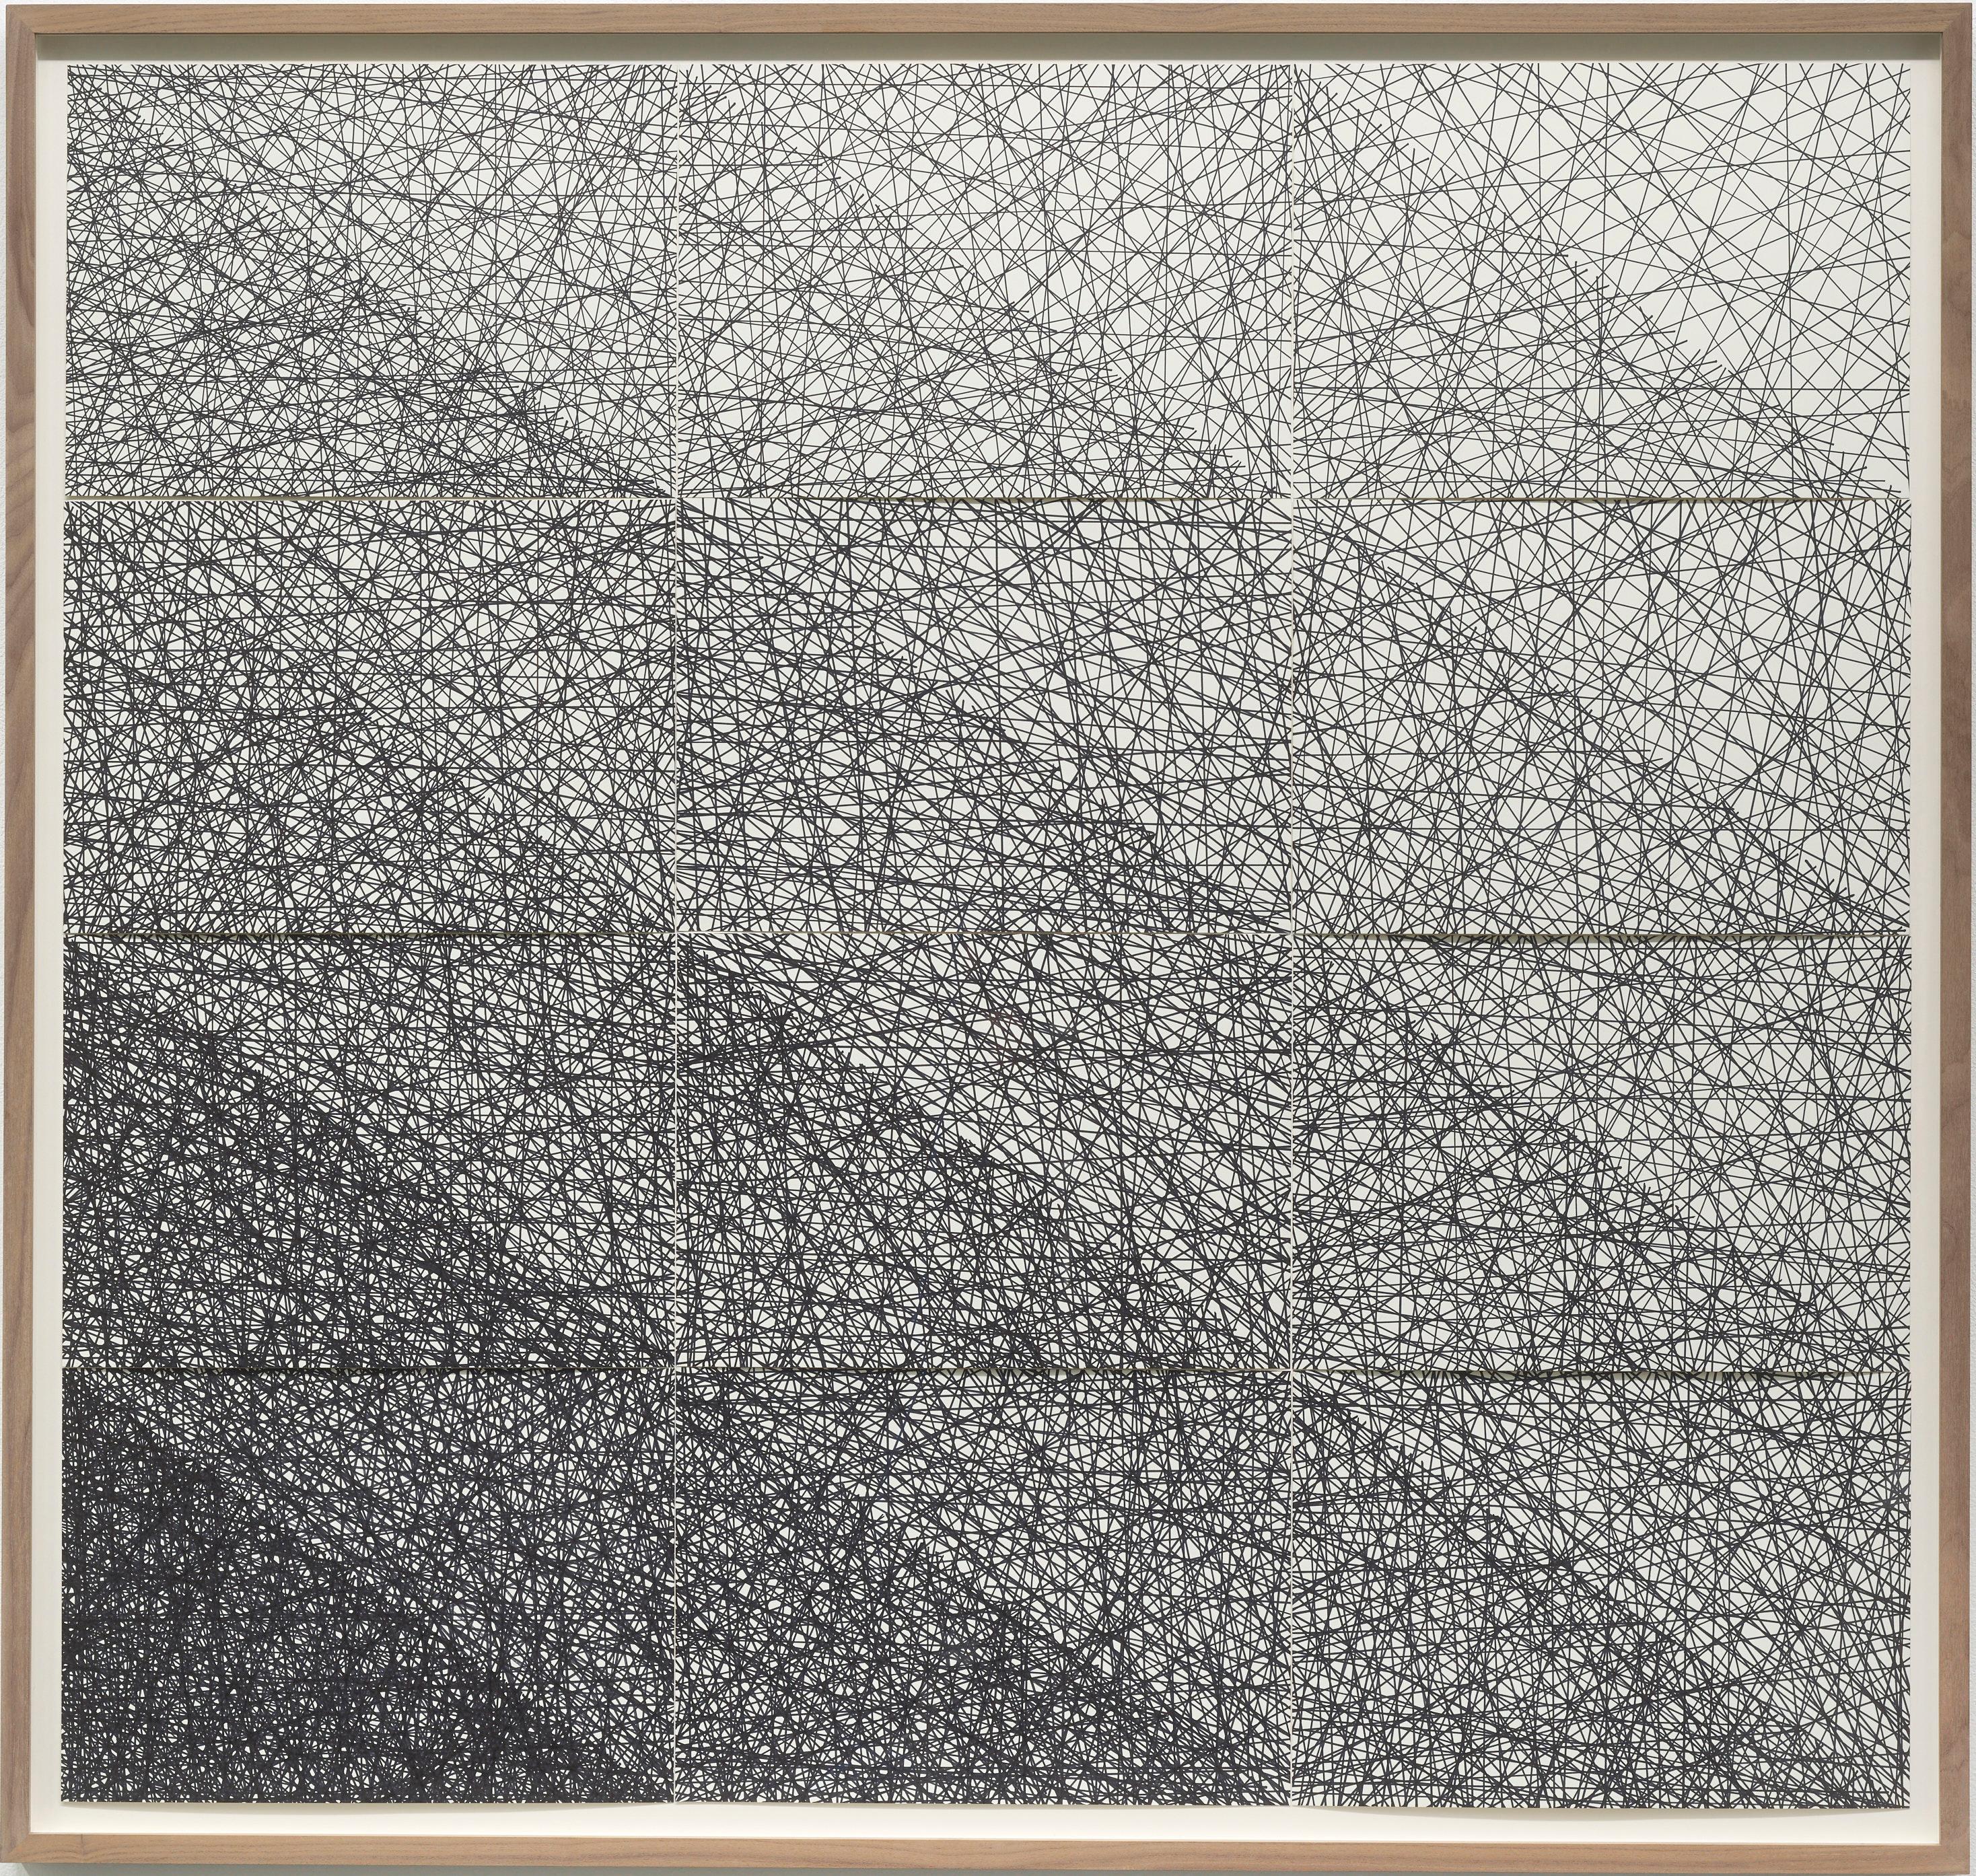 Ignacio Uriarte Abstract Drawing - "Diagonal ruler line structure" / Drawing, black marker, conceptual, Sol LeWitt